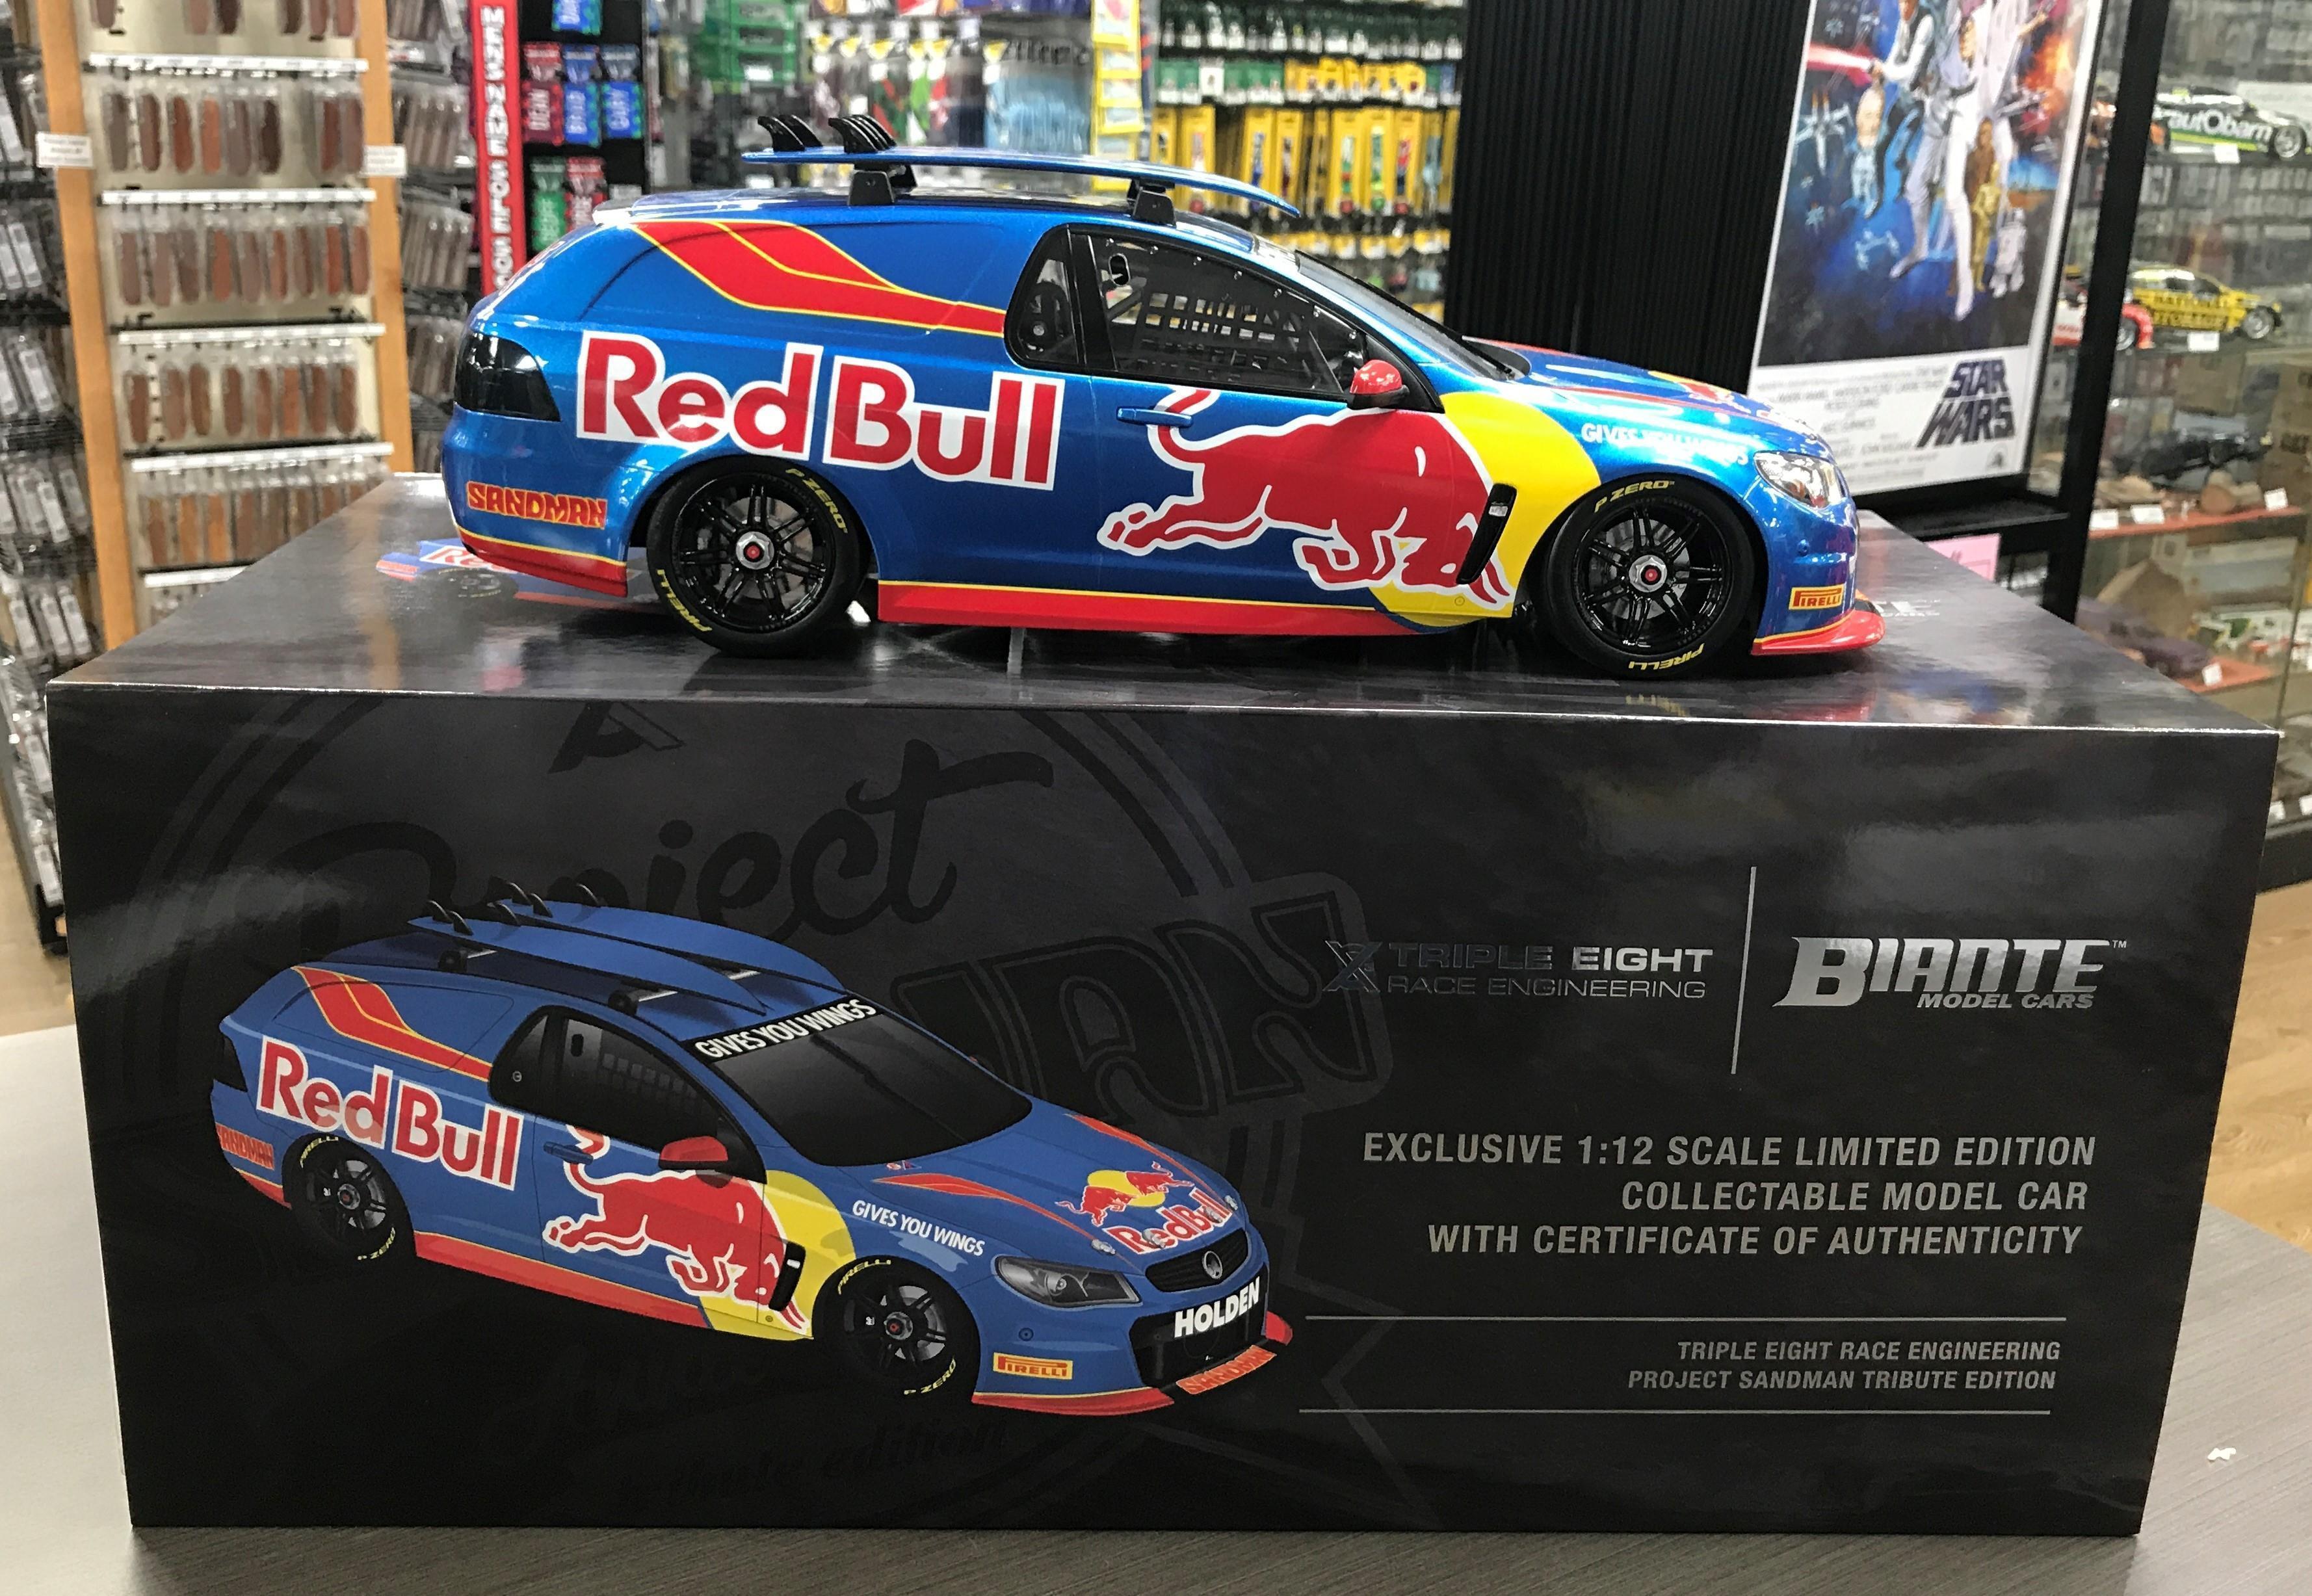 Holden Red Bull Racing Triple Eight Project Sandman Tribute Edition Blue Ride Car 1:12 Scale Model Car